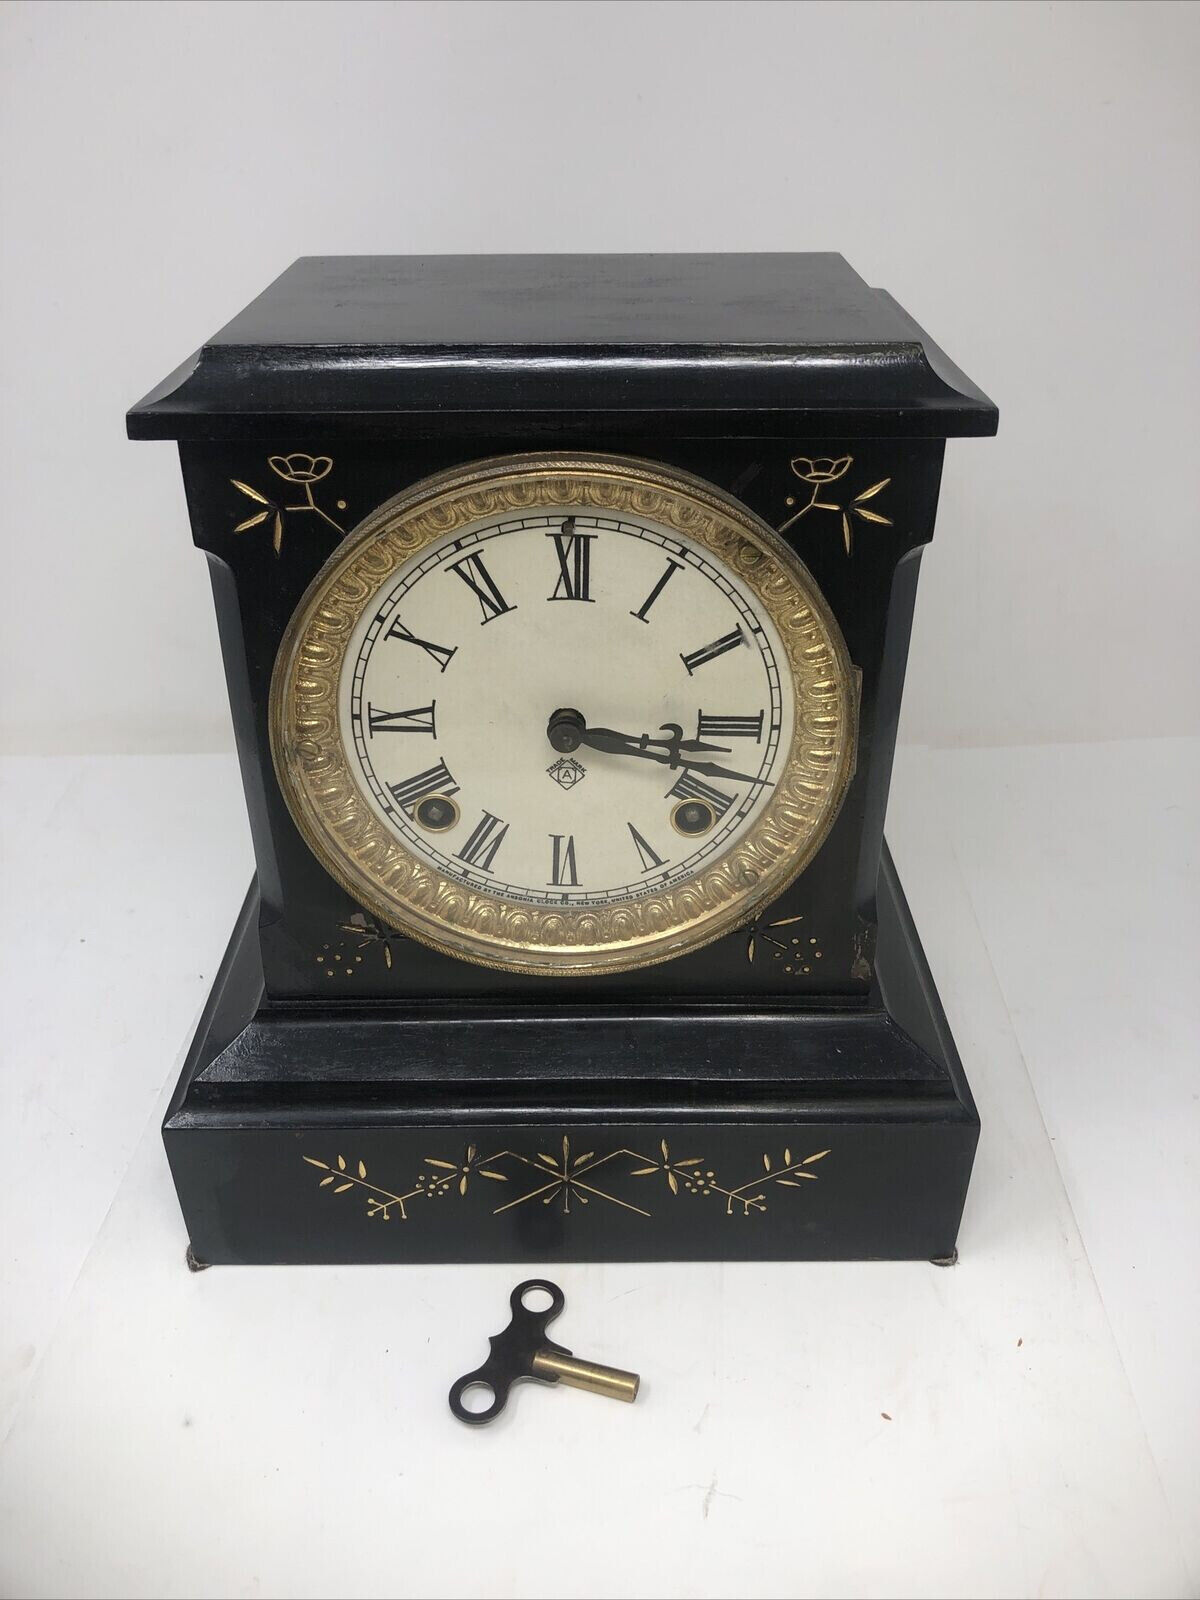 VINTAGE ANSONIA CAST IRON MANTLE CLOCK 1800S W/ KEY - PREOWNED